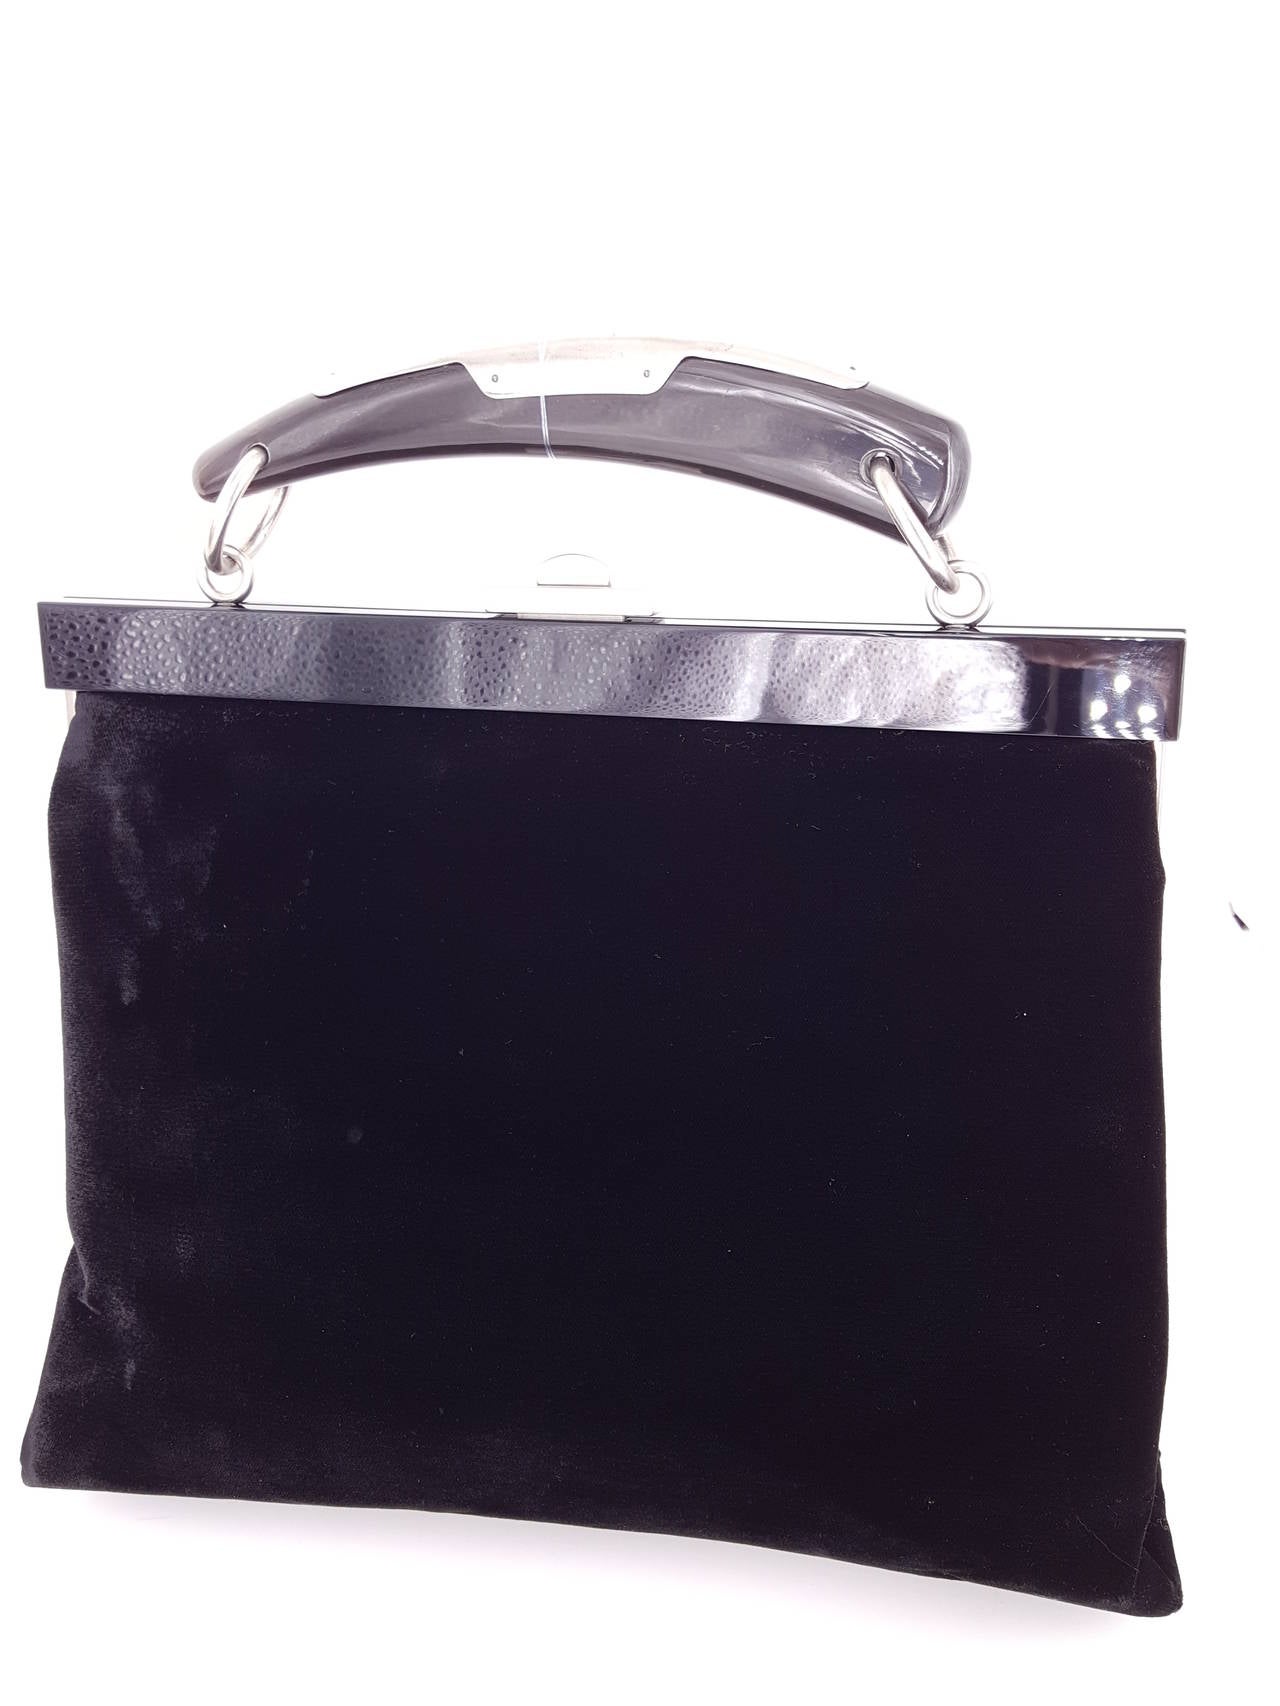 Offered for sale is this limited edition YSL velvet Mombasa Handbag in black with with Black Lucite and silver horn handle.  This is a really elegant handbag from the Mombasa collection that Tom Ford did for the House of Saint Laurent.
The interior